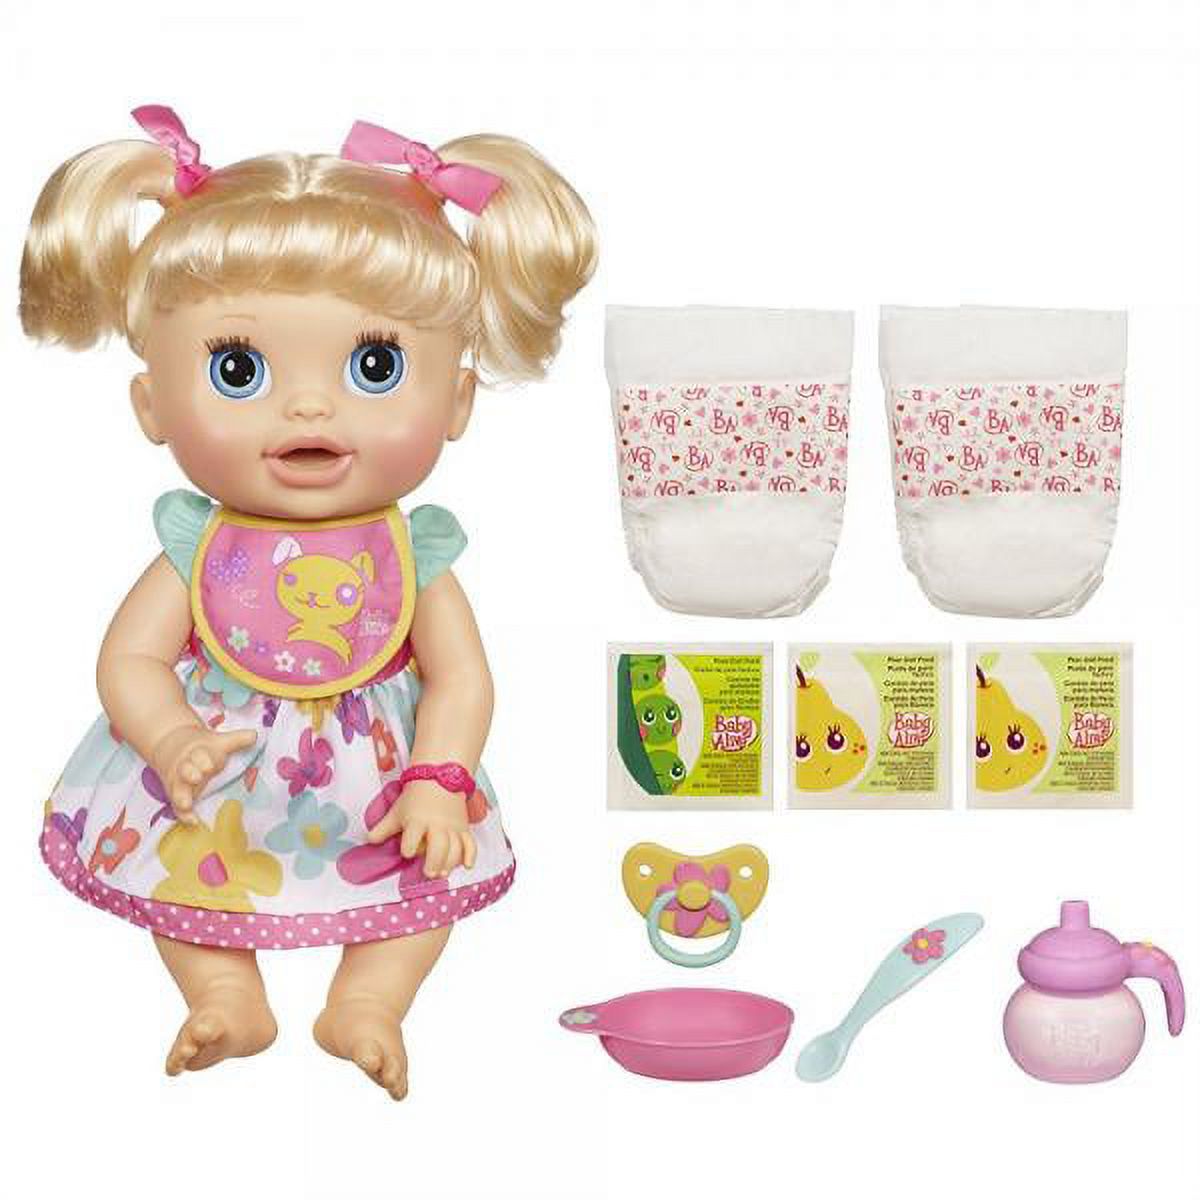 Baby Alive Real Surprises Baby Caucasian - image 1 of 2